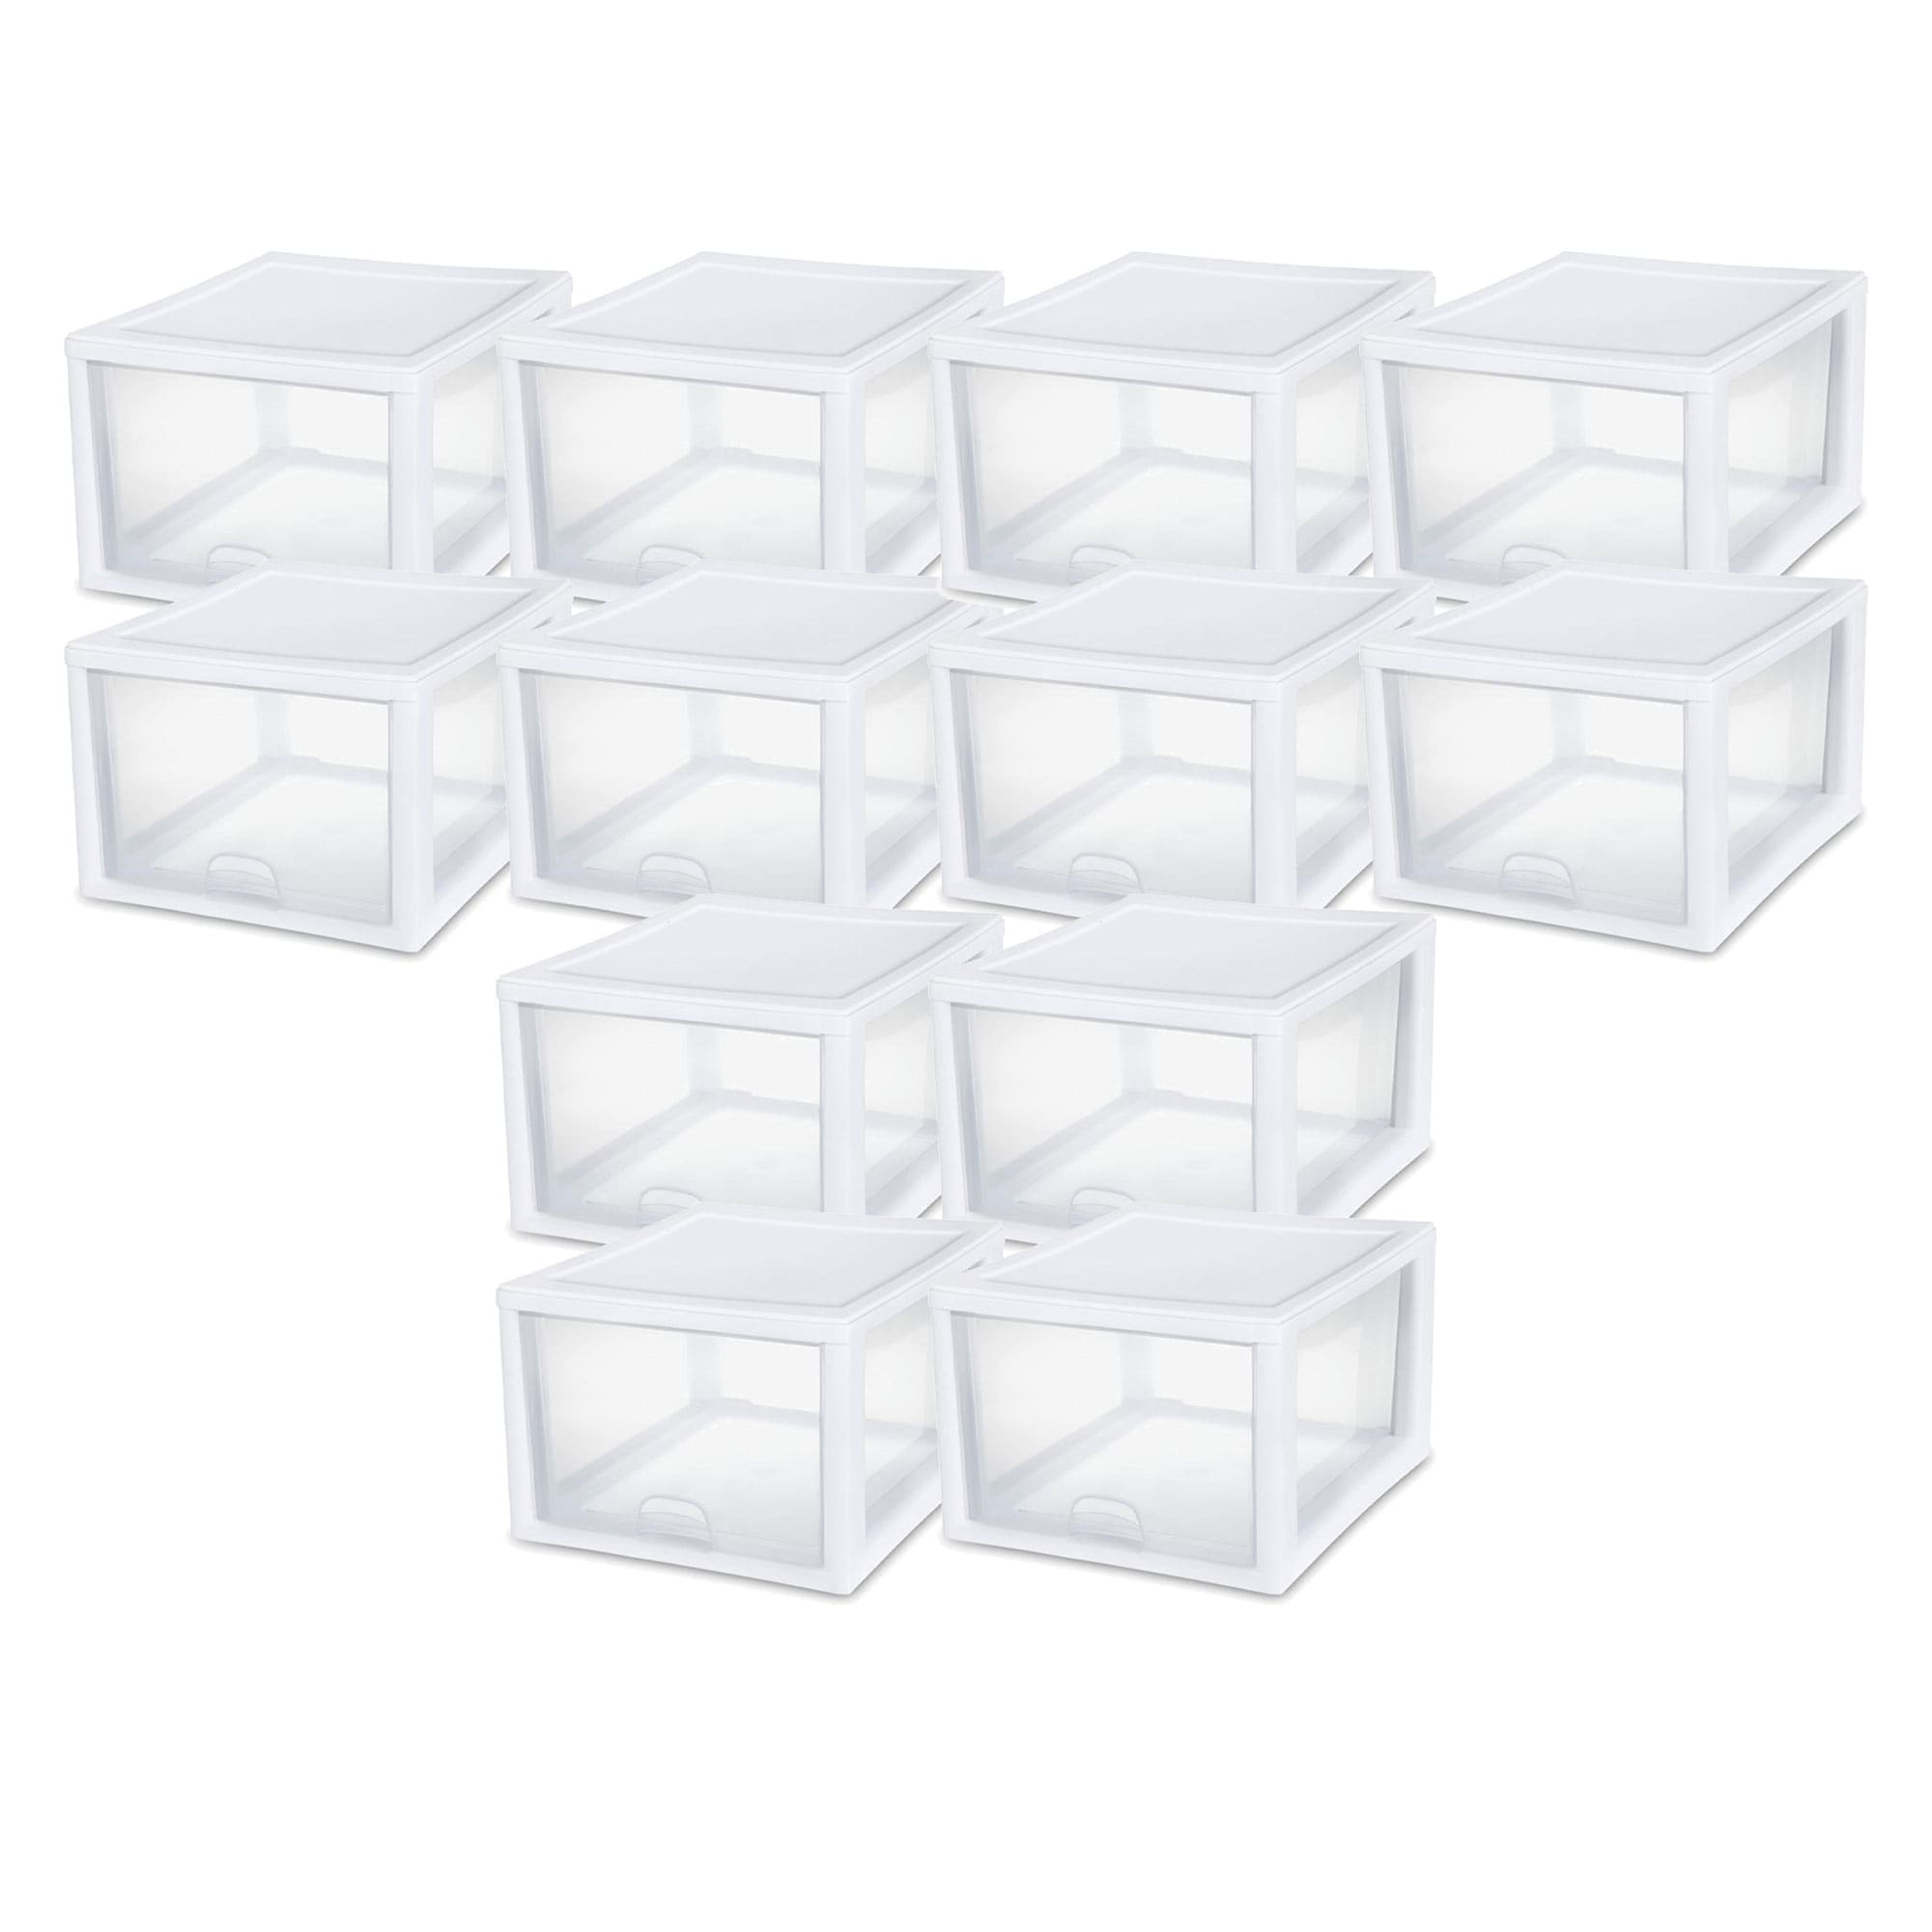 Sterilite Gasket Boxes, stacked up with printed labels, makes